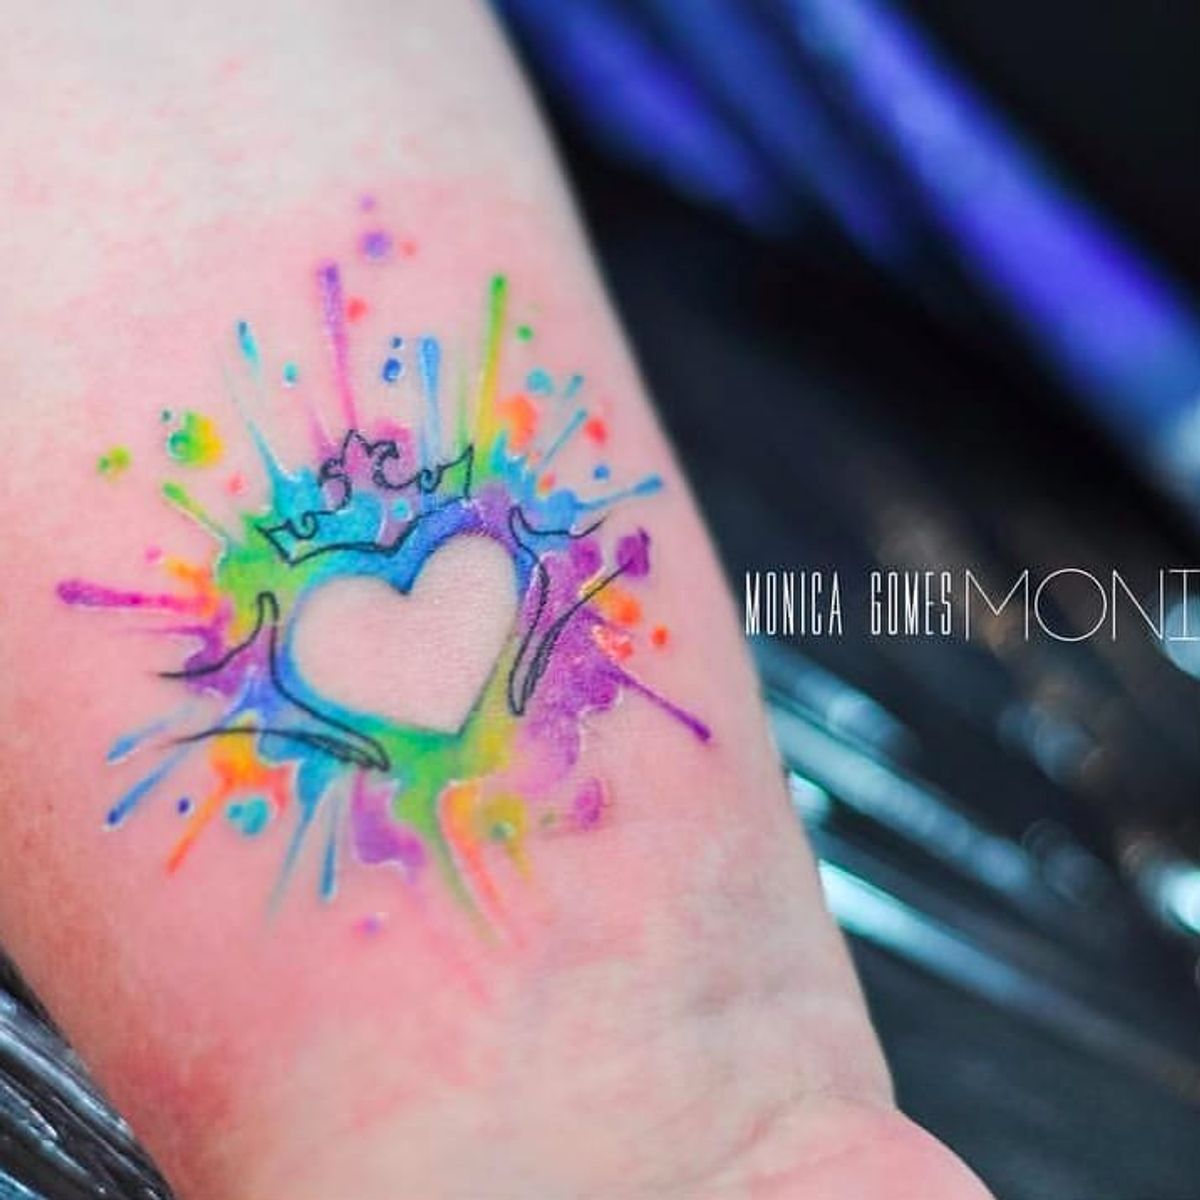 Tattoo uploaded by Lisa Petersen • Colorful heart tattoo by Monica ...